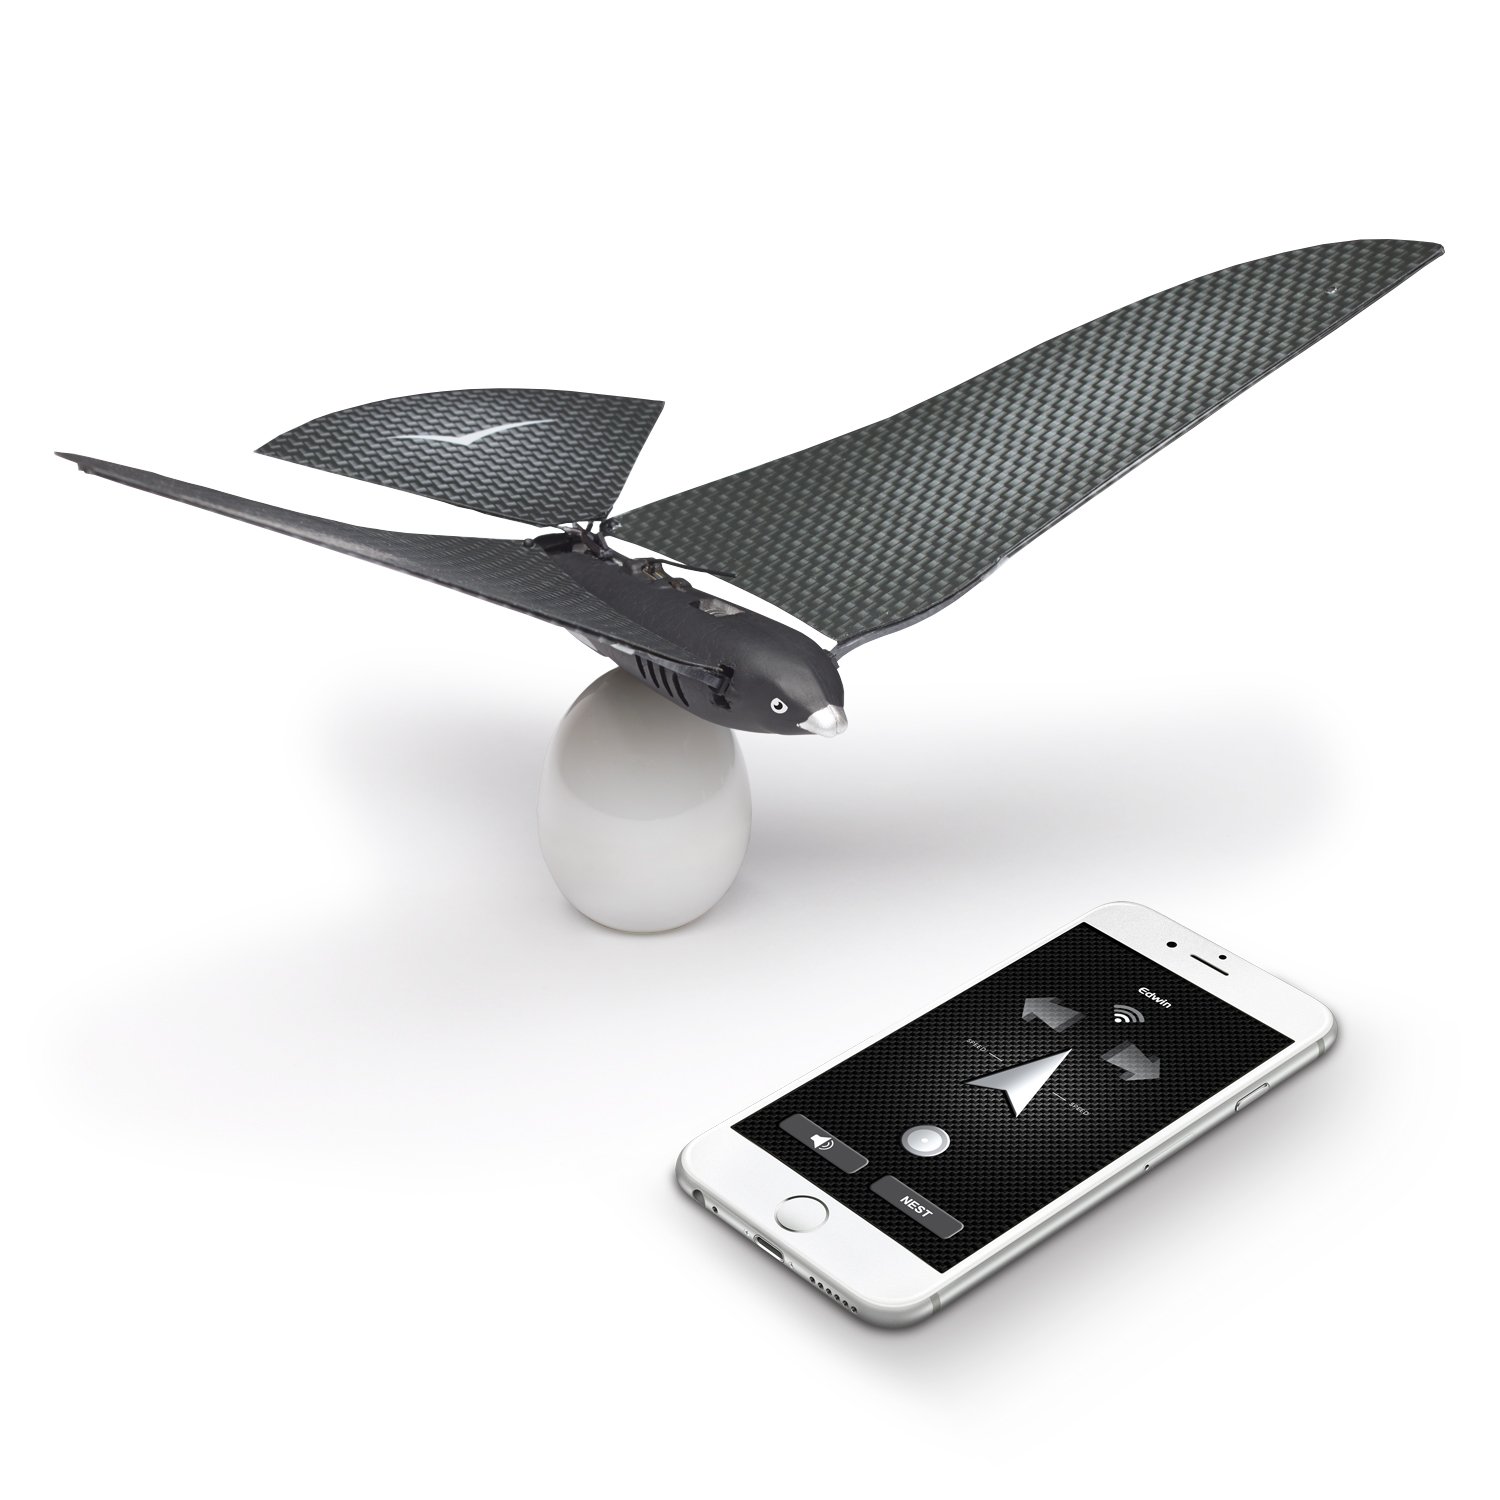 bionic-bird-is-a-lightweight-smartphone-controlled-drone